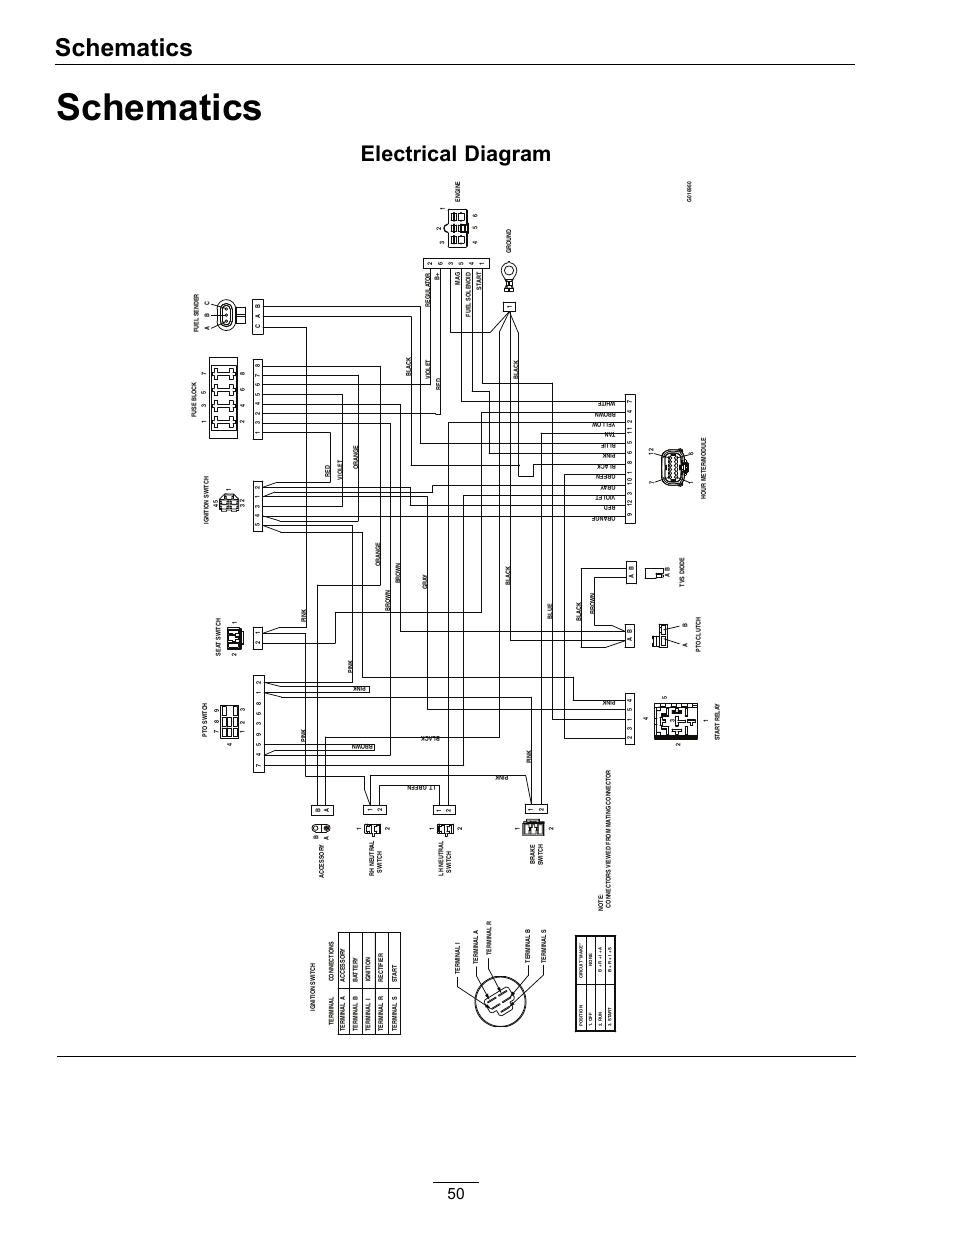 wiring diagram for ignition switch on 2006 chevy malibu 2.2 ecotec